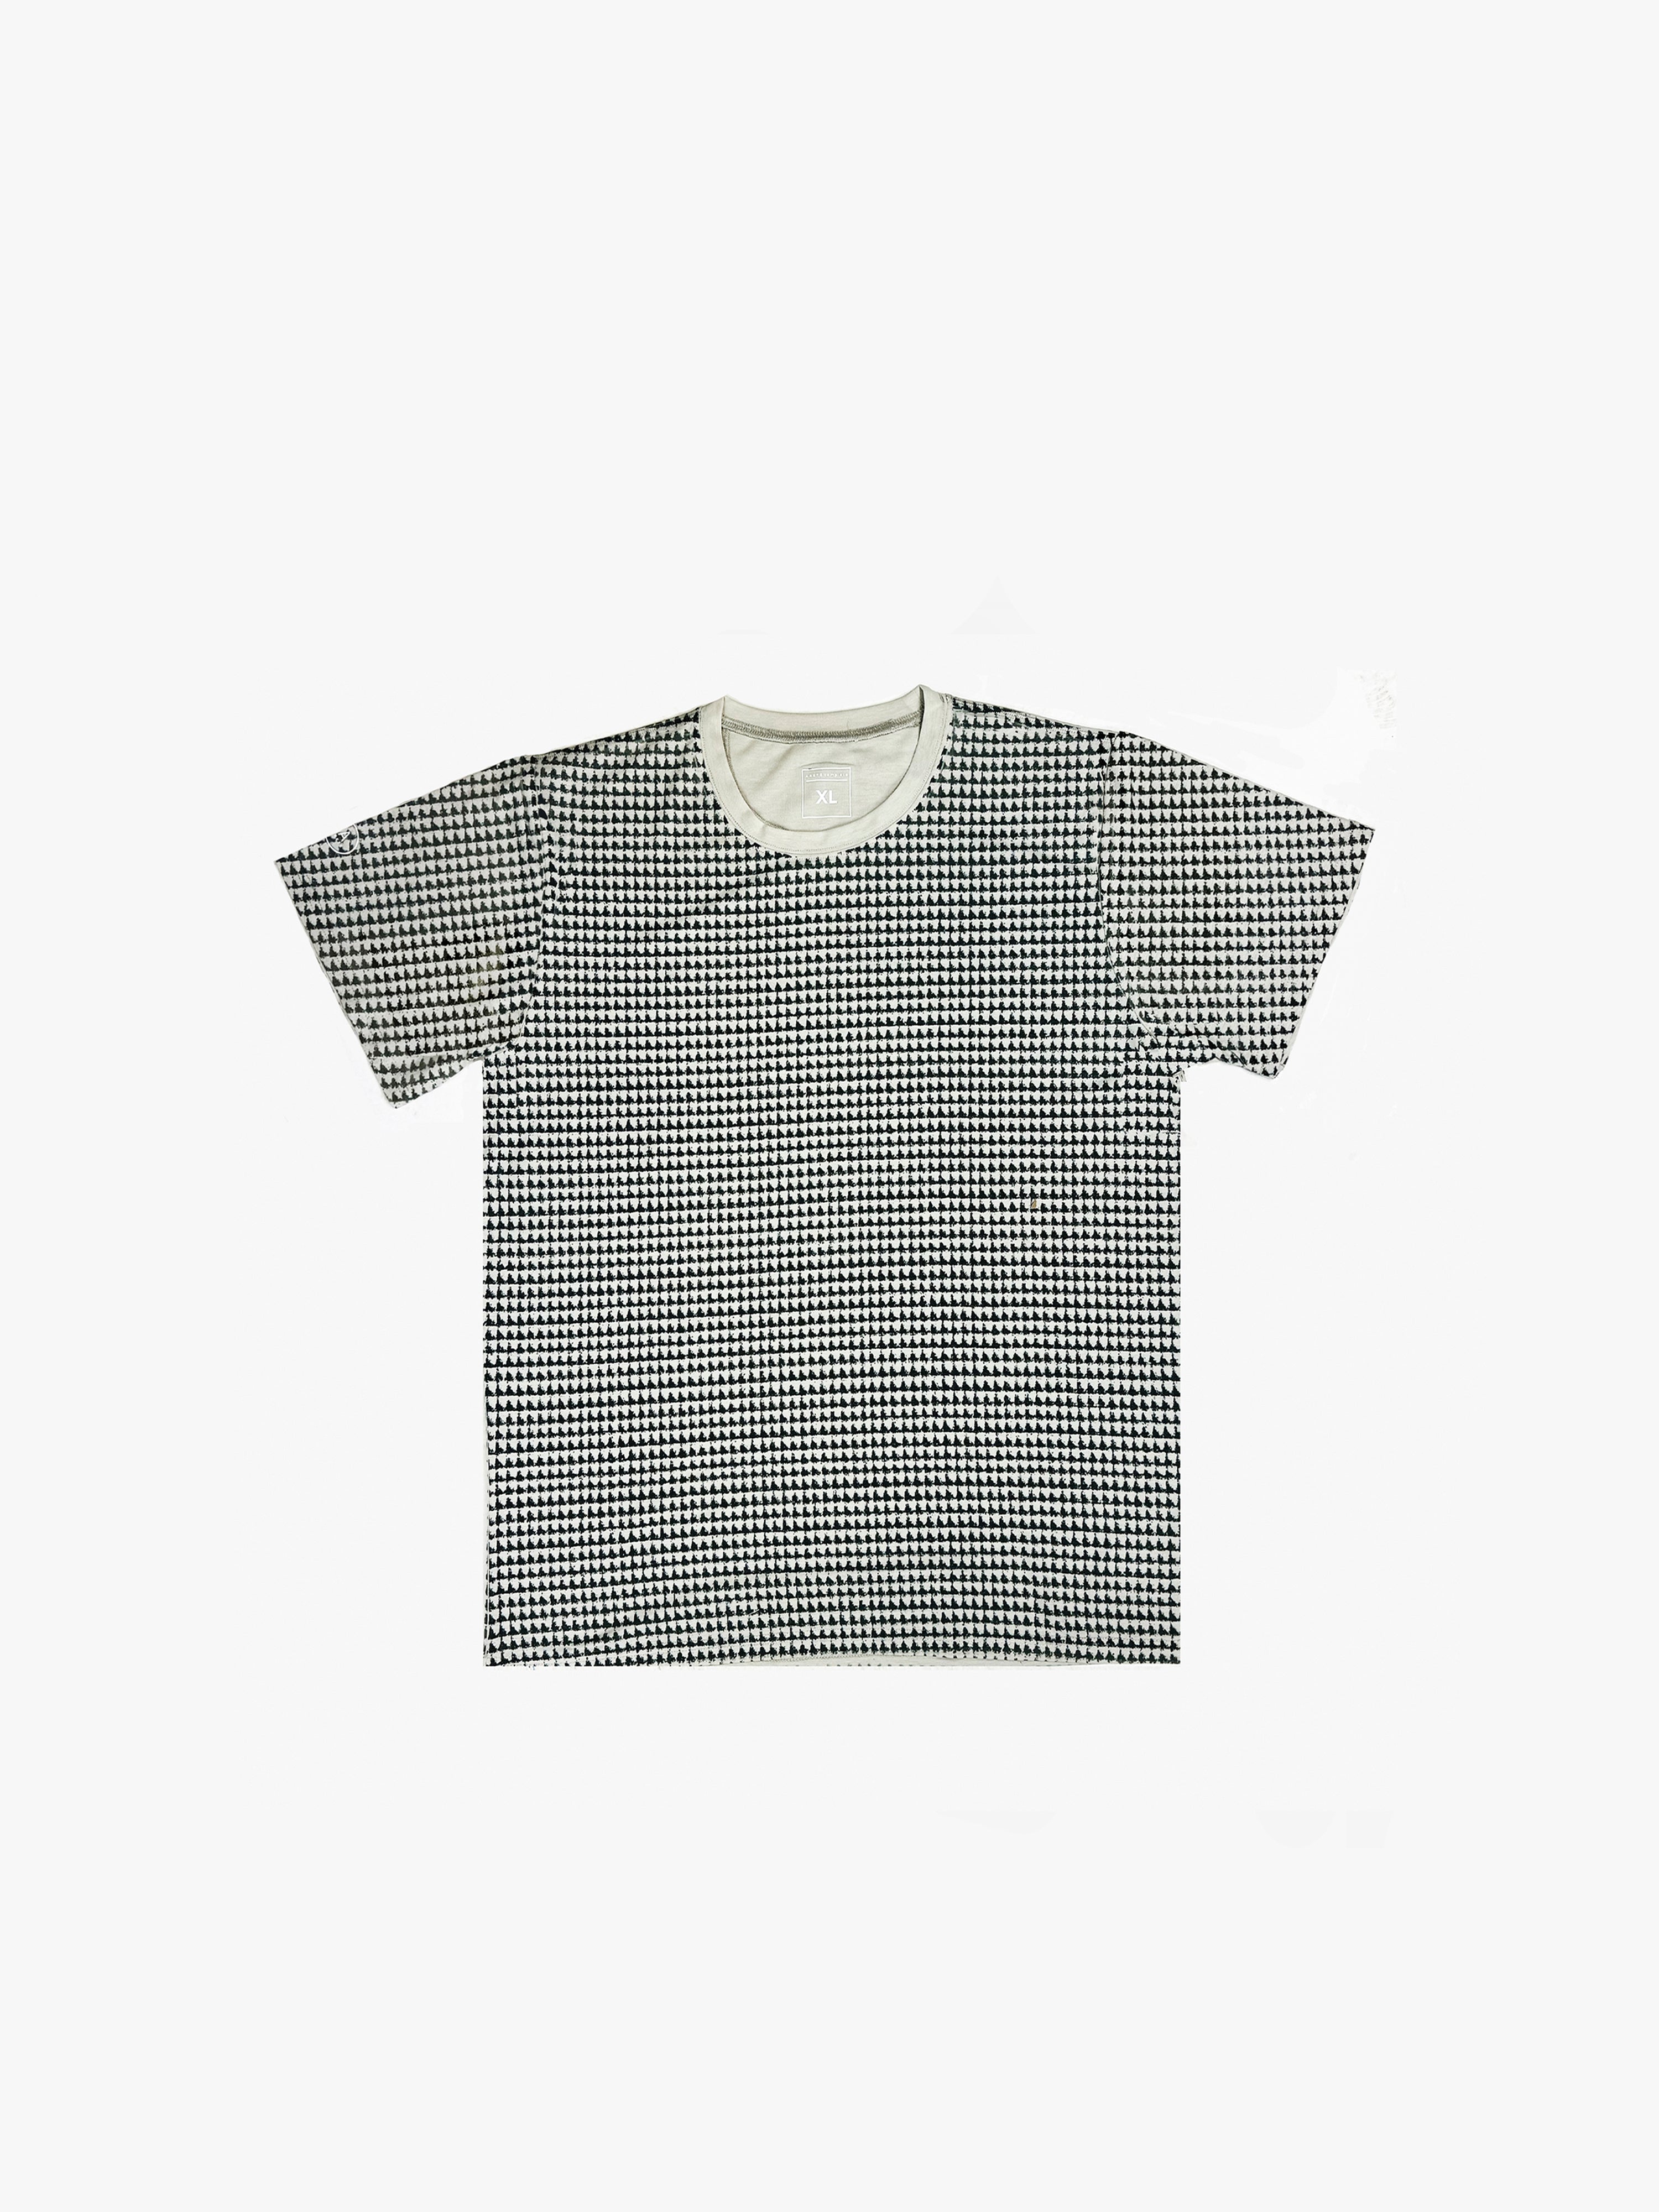 Distressed Houndstooth